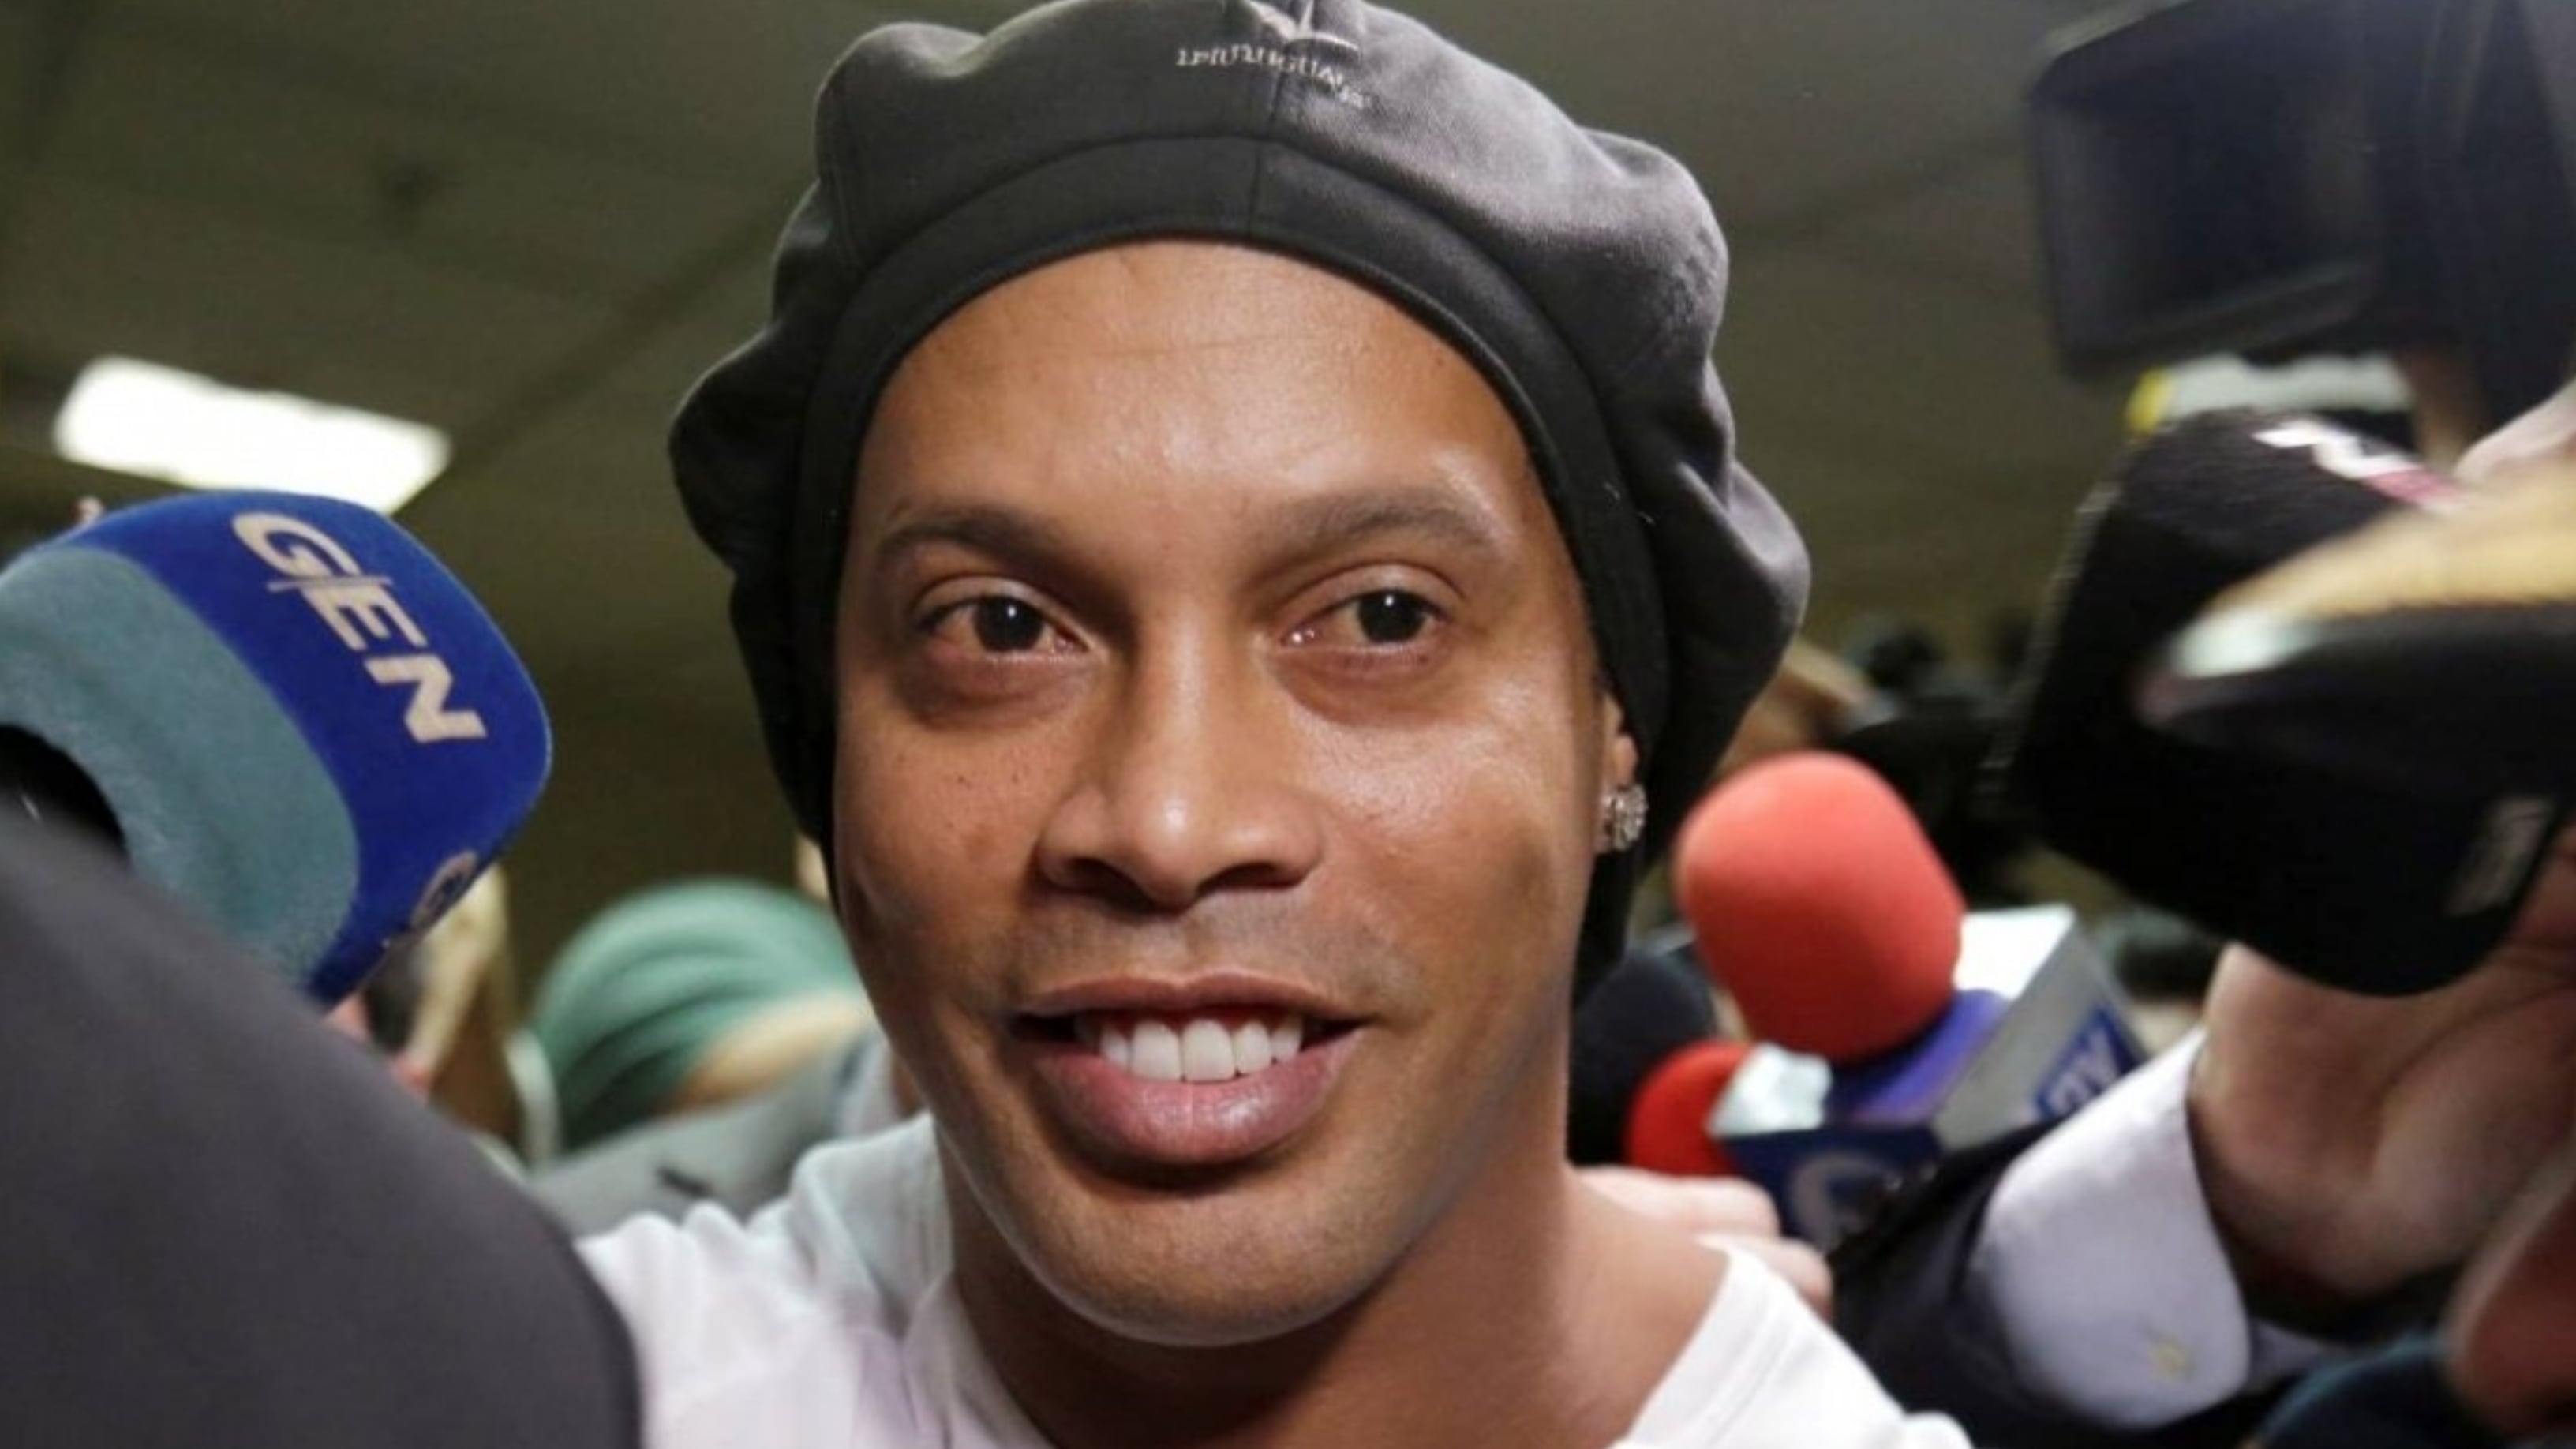 Ronaldinho was announced as the star signing of this Mexican club that would take him out of retirement